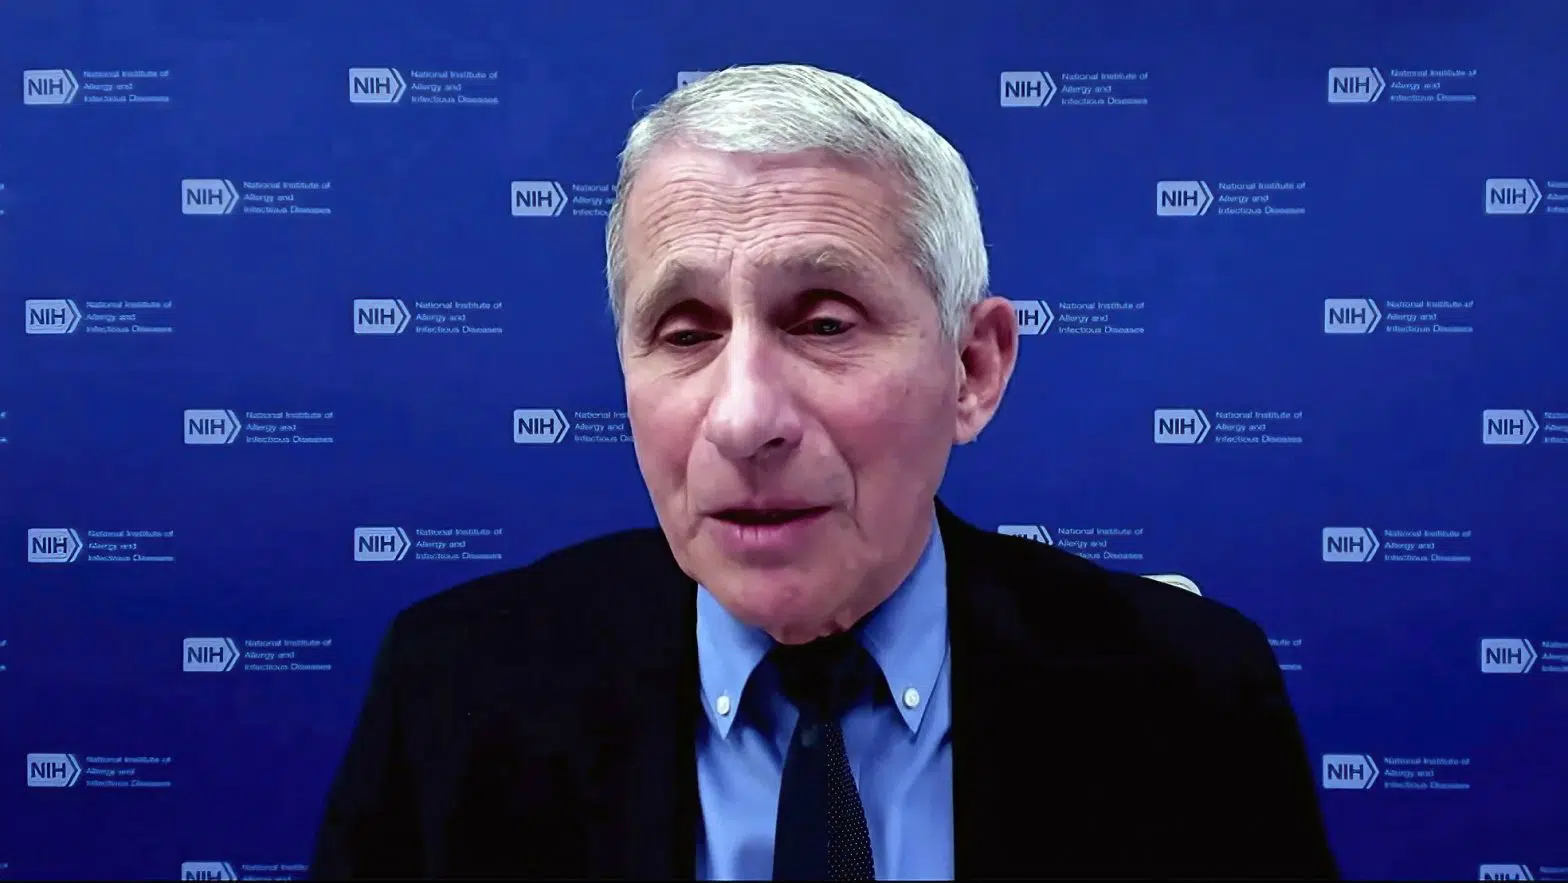 Fauci Warns Against Super Bowl Parties to Avoid Virus Spread